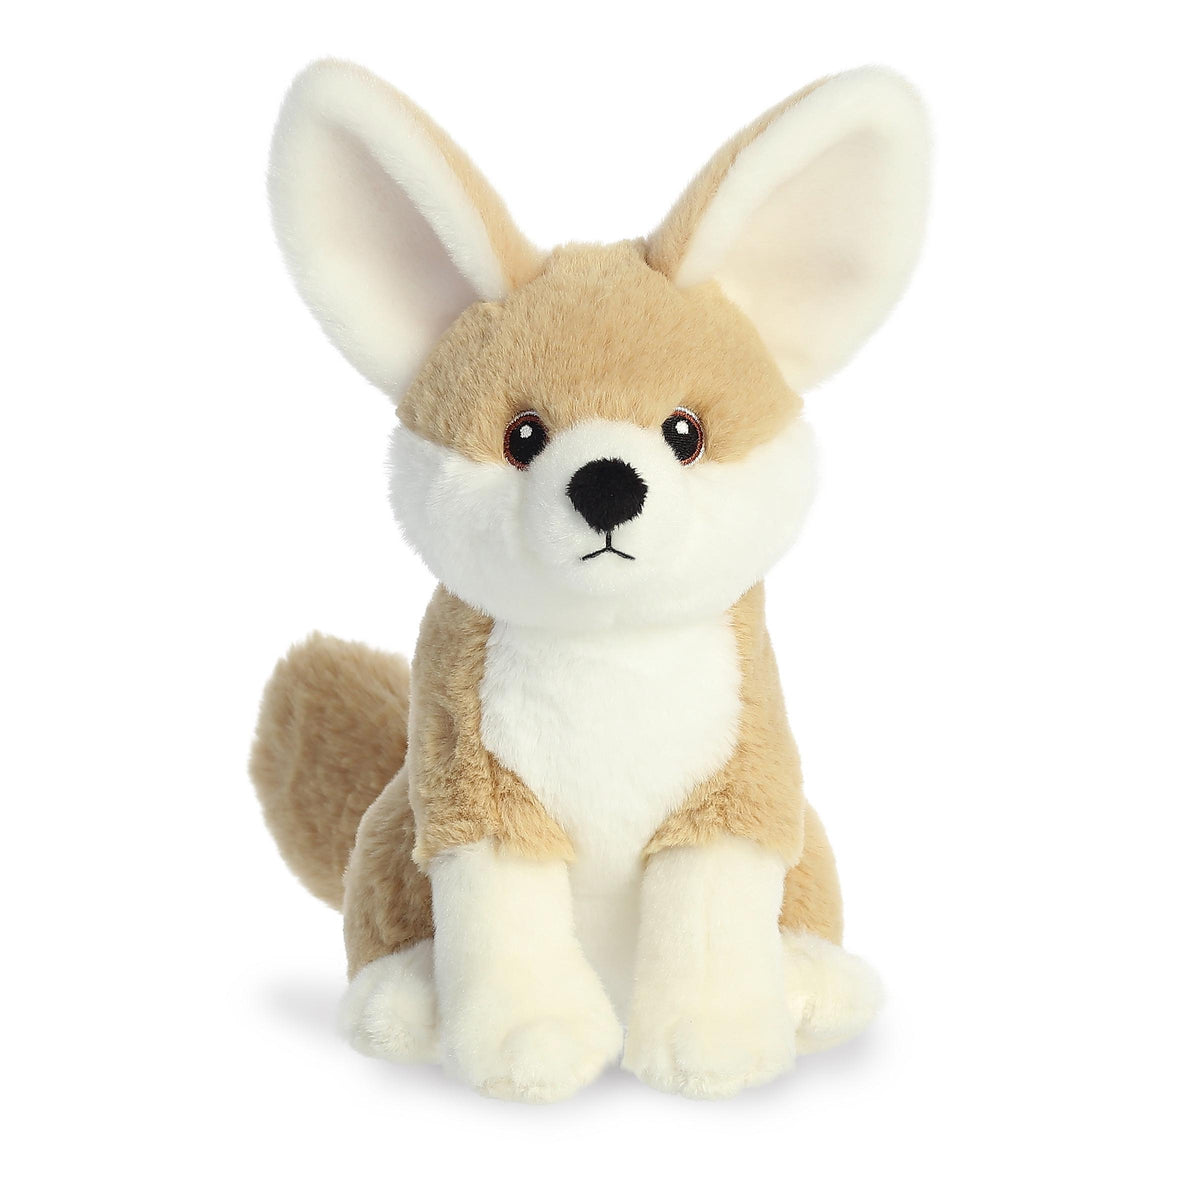 A sweet fennec fox plush with a tan and white coat, big ears, cute embroidered eyes, and an eco-nation tag